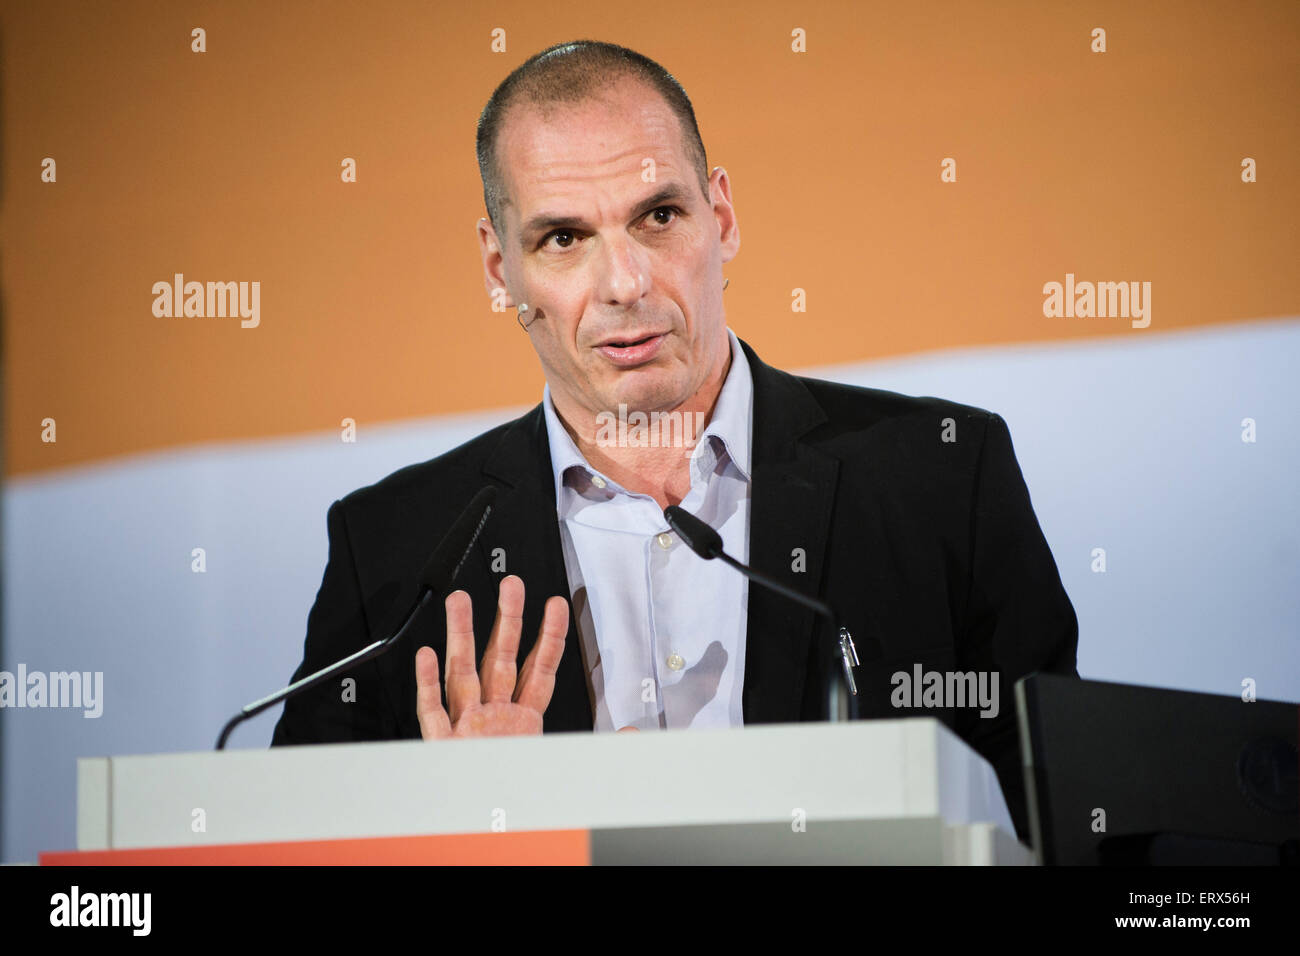 Greek Finance Minister Yanis Varoufakis speaks on the topic 'Greece's Future in the EU' during an event organized by the Hans Boeckler Foundation in the French Cathedral in Berlin, Germany, 08 June 2015. Photo: GREGOR FISCHER/dpa Stock Photo